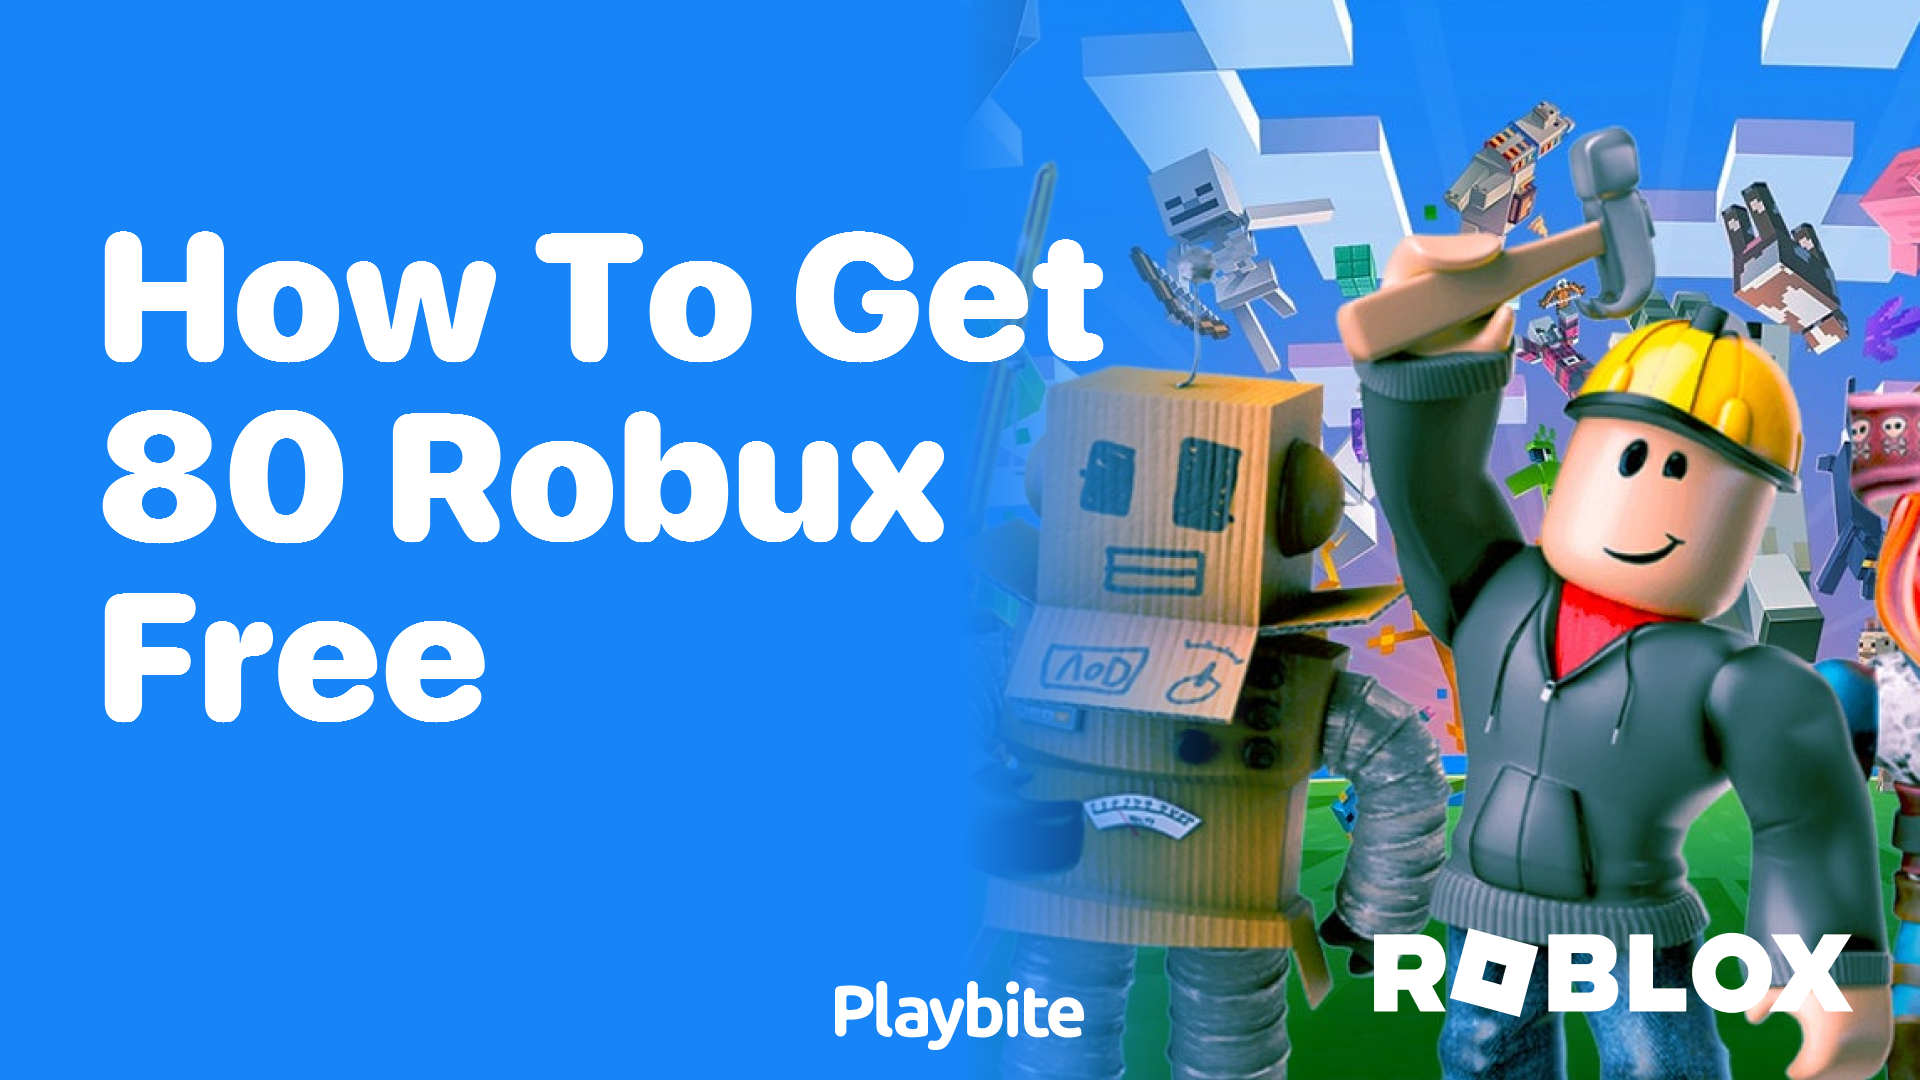 How to Get 80 Robux for Free?